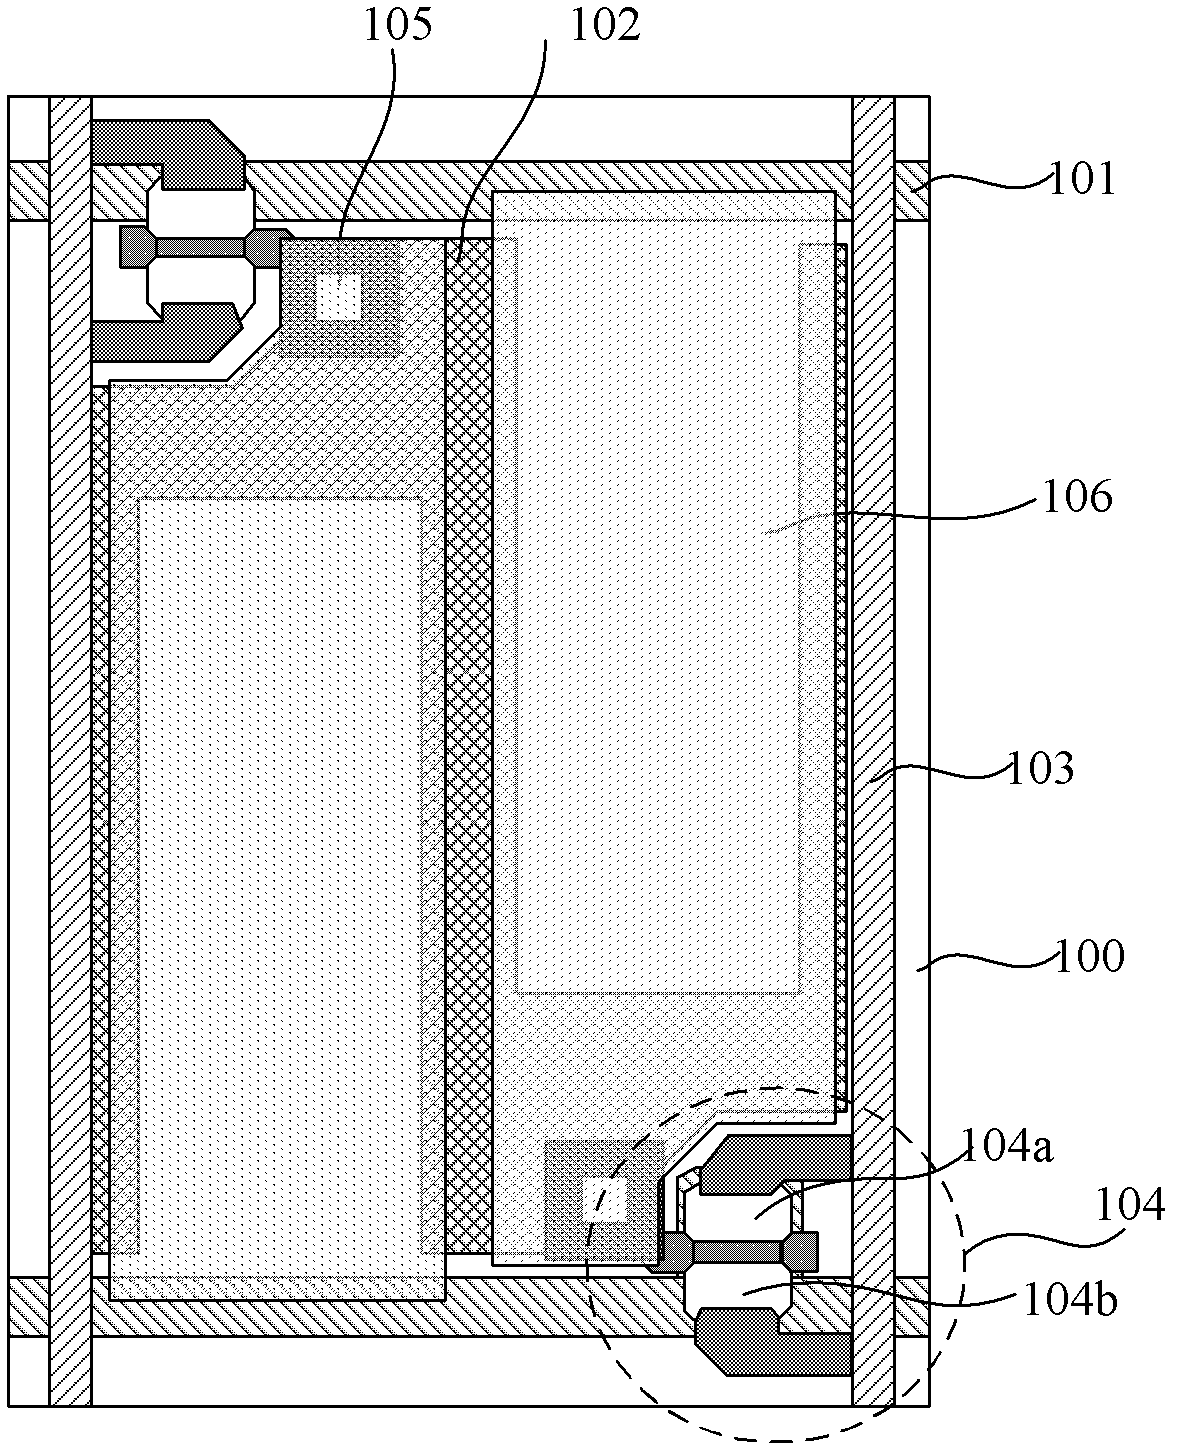 TFT (Thin Film Transistor) liquid crystal display device and manufacturing method thereof